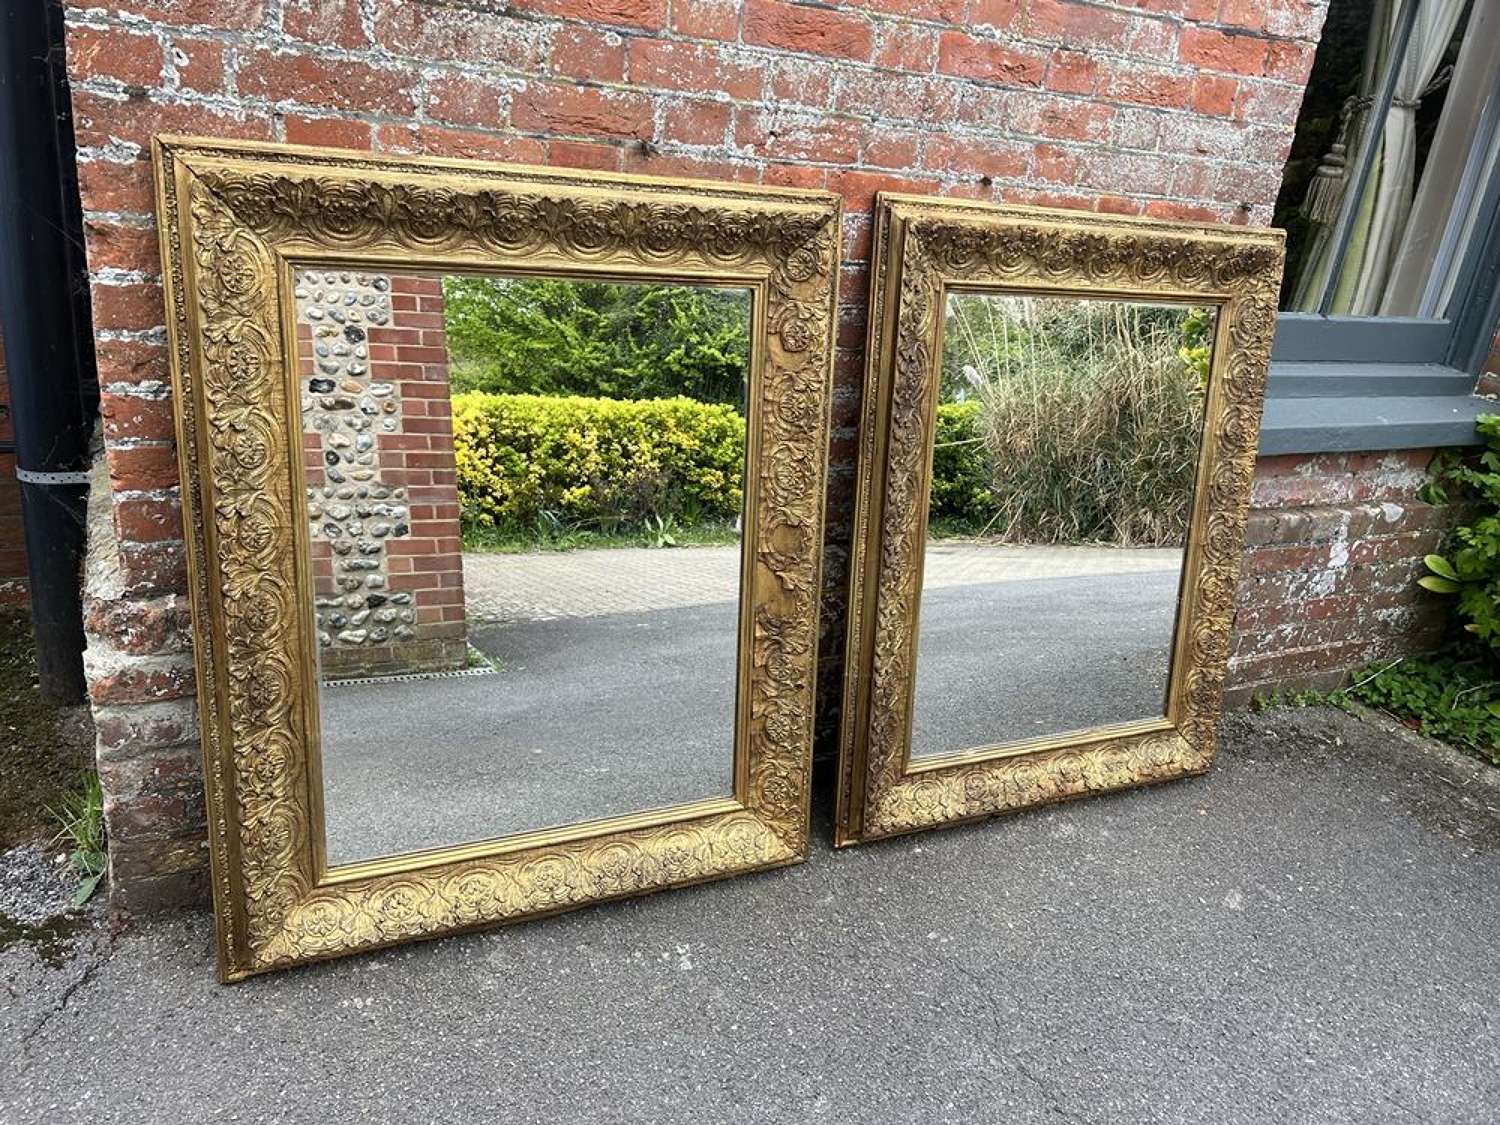 AN Exceptional Pair of Antique English 19th C gilt Mirrors.